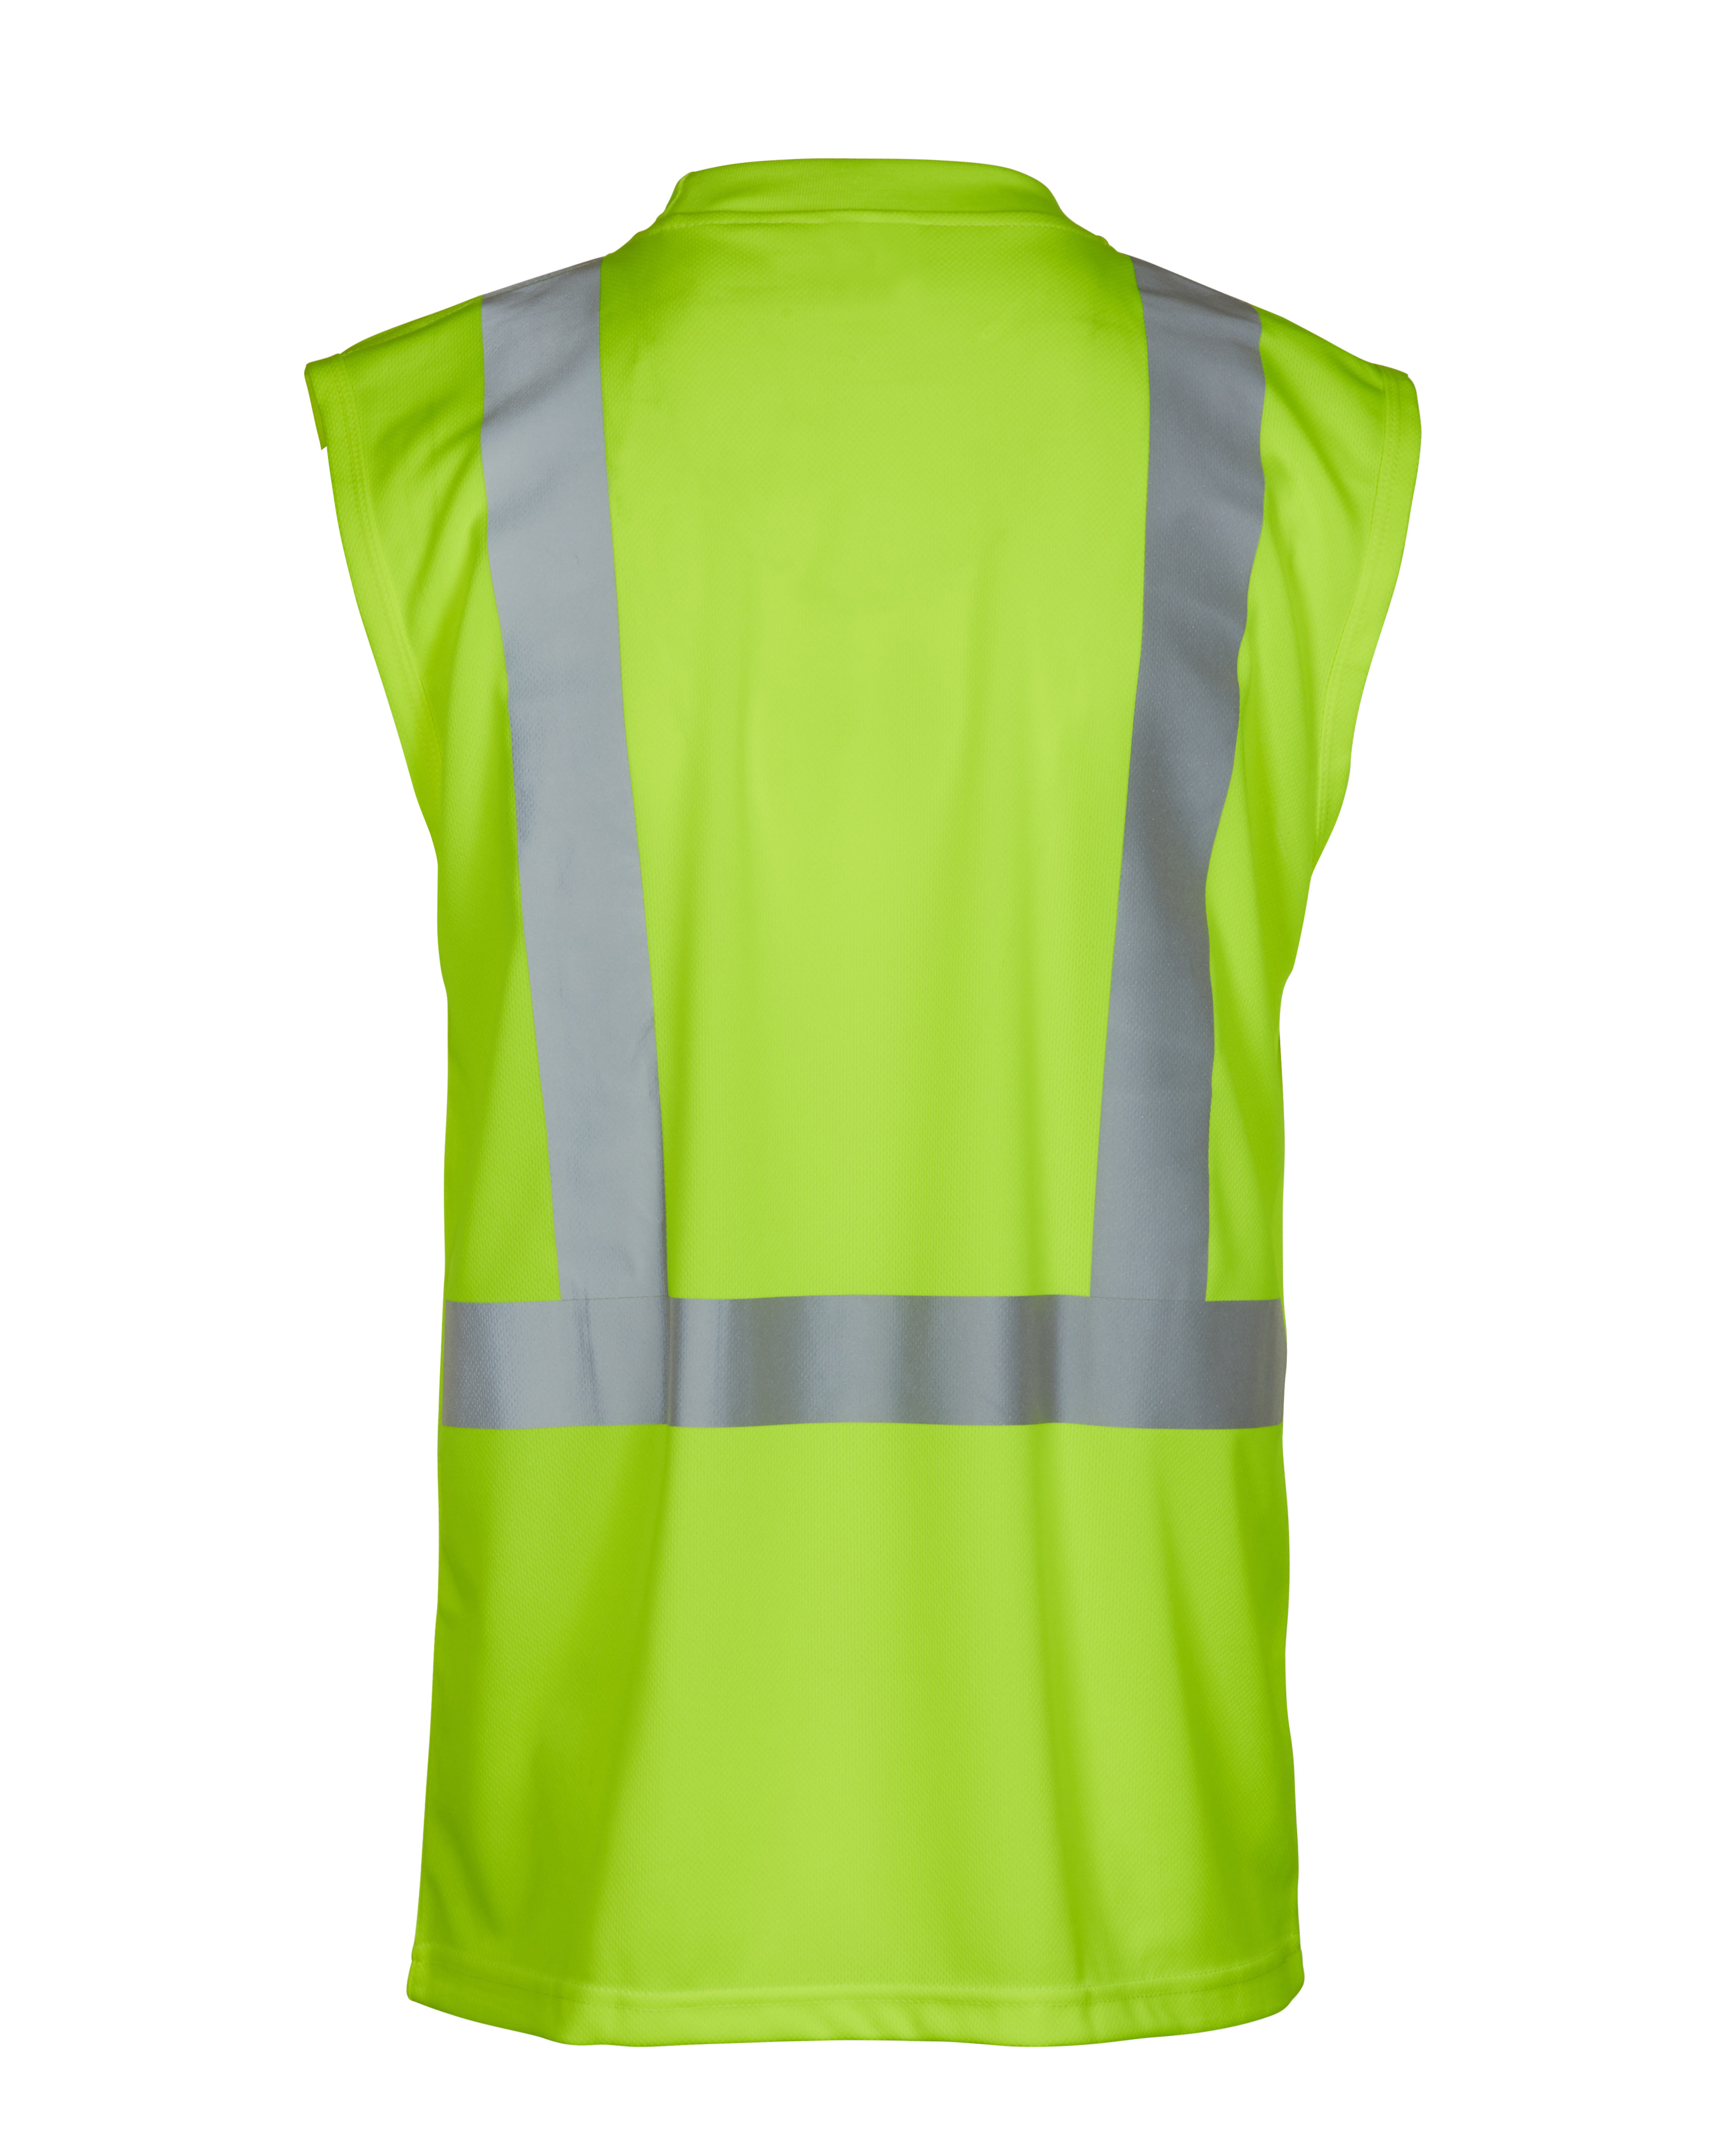 Picture of Max Apparel MAX403 Class 2 Sleeveless T-shirt, Safety Green